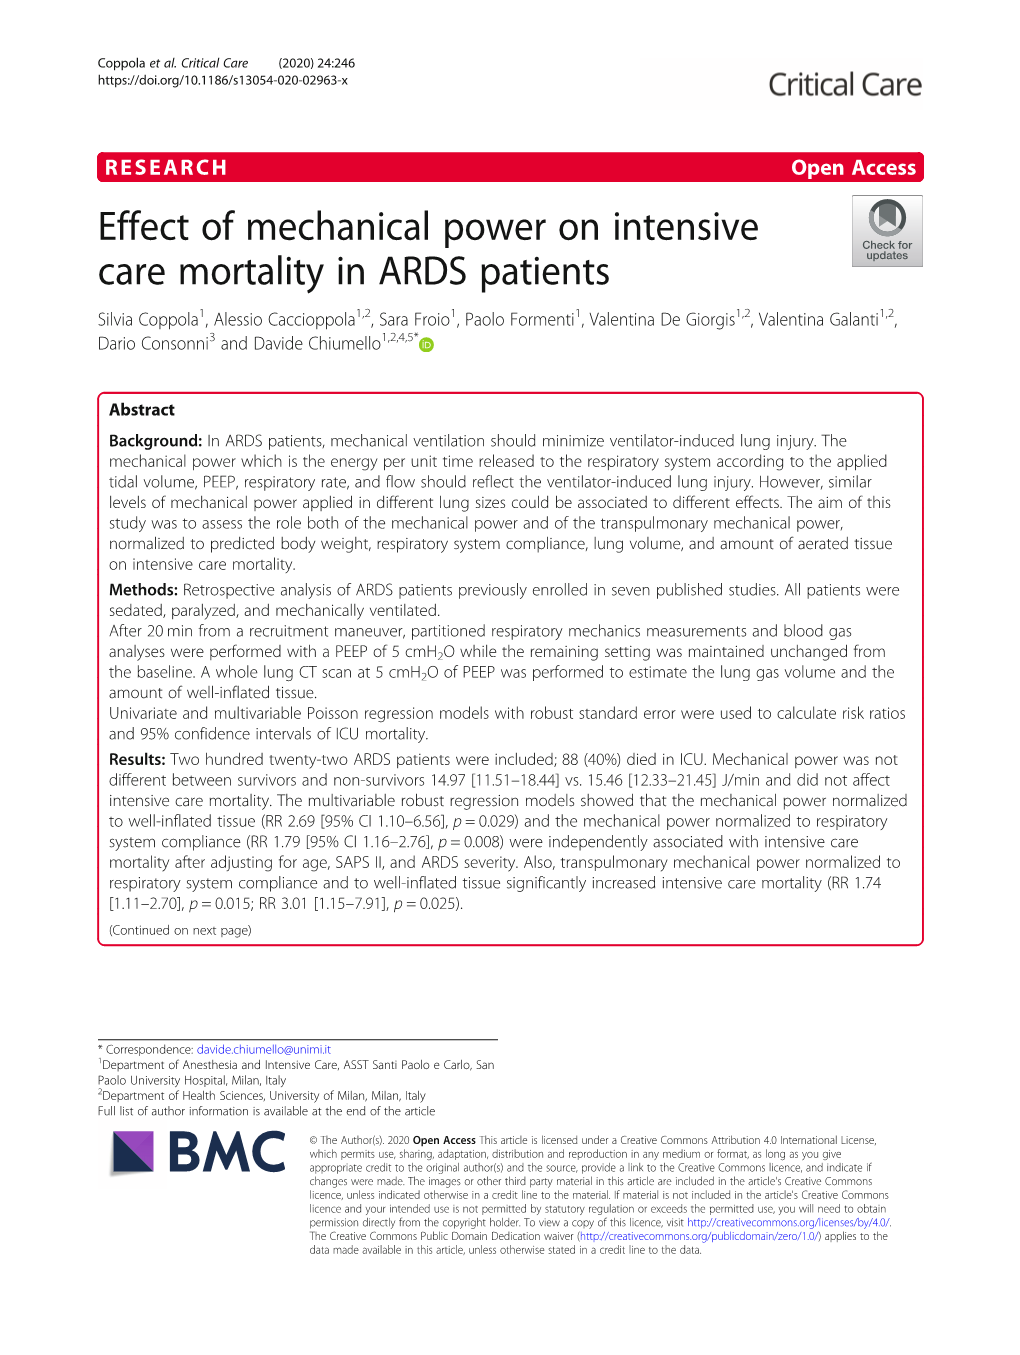 Effect of Mechanical Power on Intensive Care Mortality in ARDS